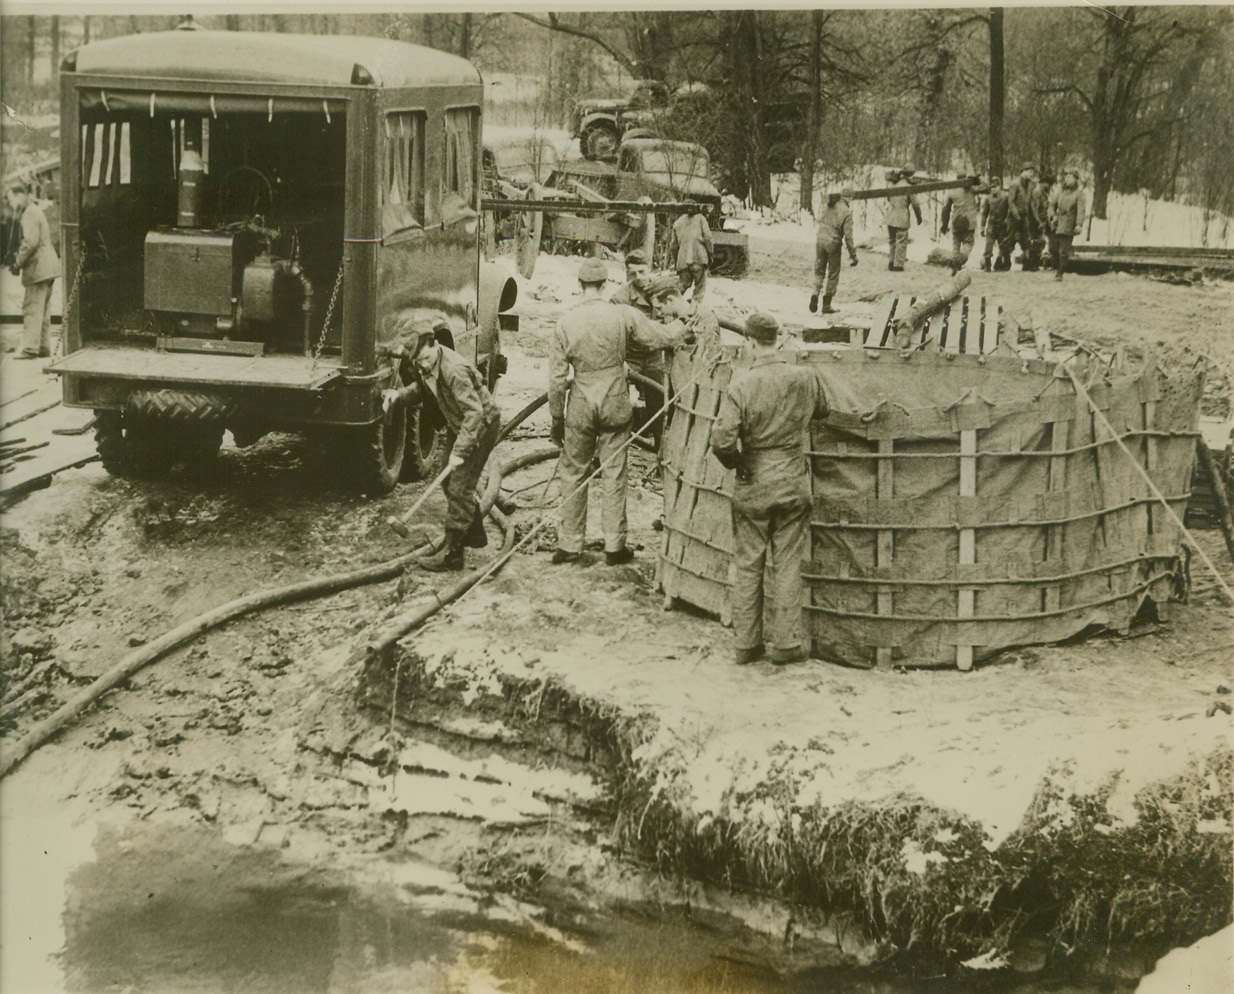 NEW MOBILE WATER PLANT, 2/1/41  FORT CUSTER, MICHIGAN- The Army is proud of this machine, a mobile water plant that pumps, purifies and delivers 150,000 gallons of water every twenty-four hours. Each unit carries four canvas 5,000-gallon tanks, one of which is shown at right of truck, and can start delivering at full capacity 30 minutes after reaching water source. Army engineers are pictured testing the machine at Fort Custer, Michigan. Credit: OWI Radiophoto from ACME;